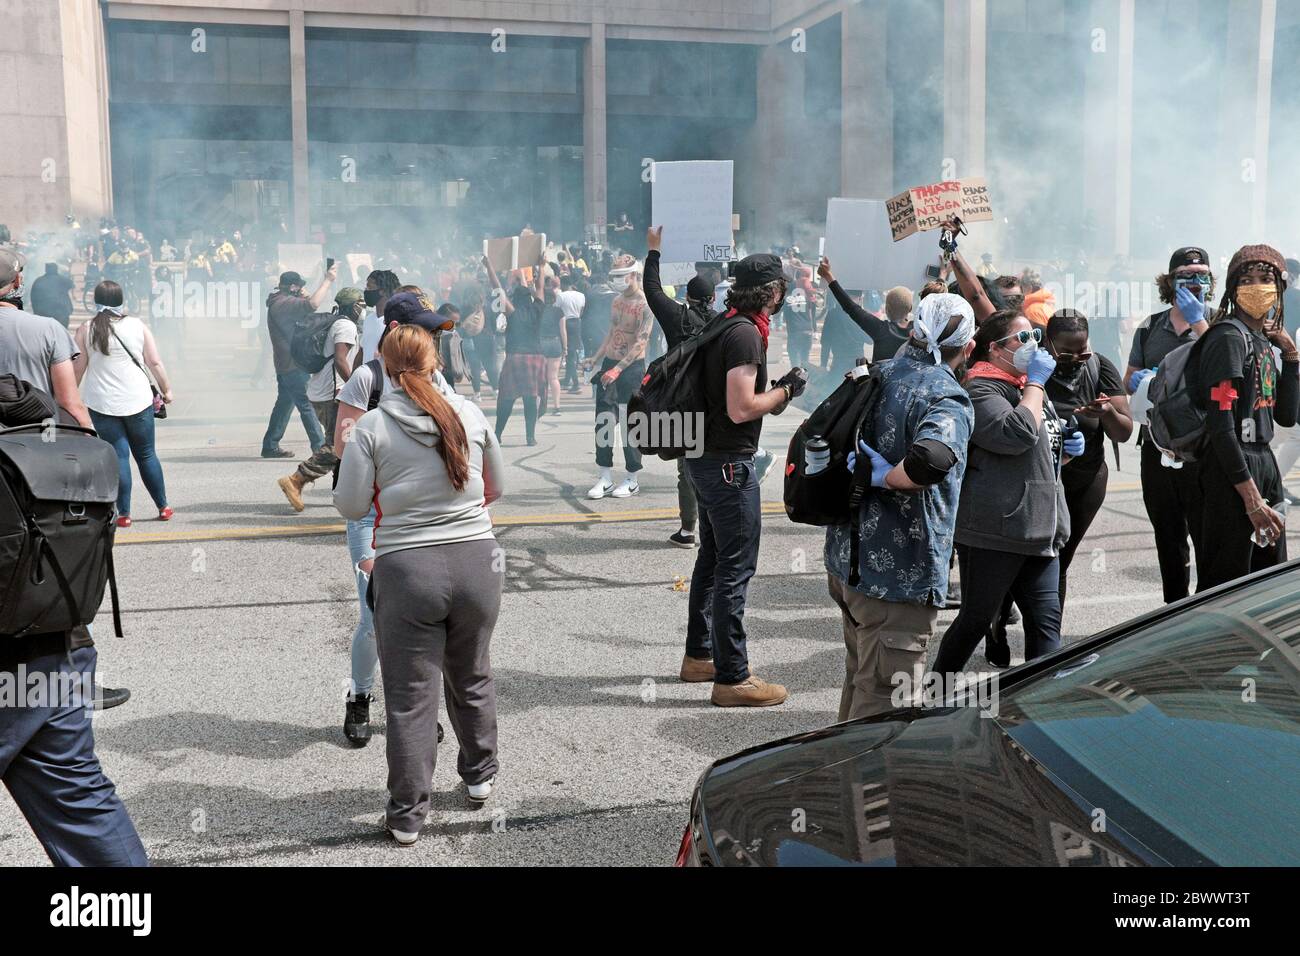 Cleveland, Ohio, USA. 20 May, 2020.  Chaos ensues following a peaceful Black Lives Matter march through Cleveland, Ohio, USA.  Thousands of protesters against police abuse against blacks in the US marched to the Justice Center on Lakeside Avenue where the peaceful gathering turned violent with tear gas, chemicals, and plastic bullets were used against them by the Cleveland police. The Justice Center, headquarters for the Cleveland Police, was a primary target of protesters before spreading their ire throughout downtown where busineses were looted and vandalized resulting in a six day curfew. Stock Photo